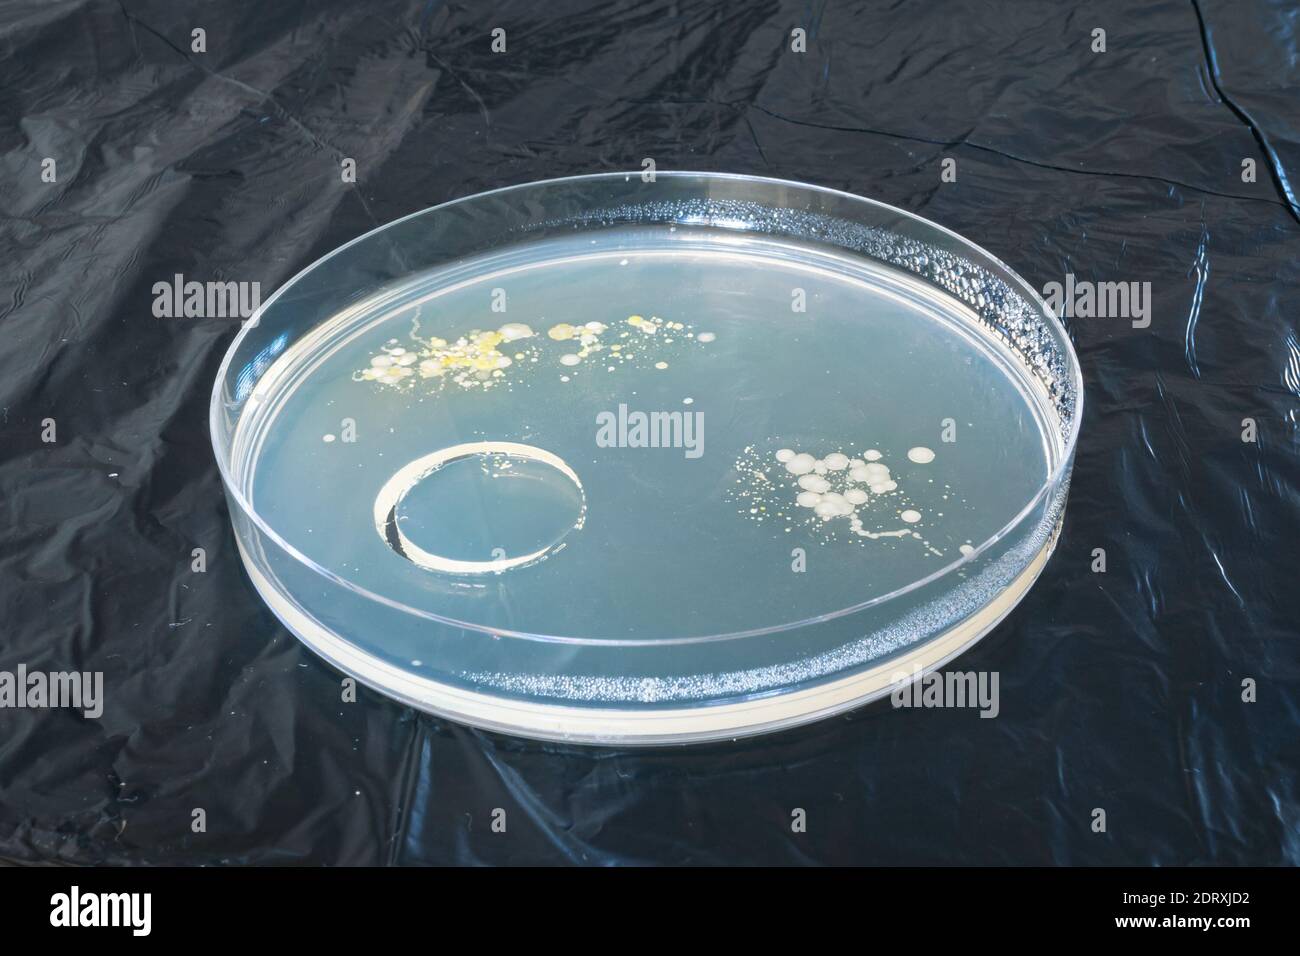 Petri culture dish with bacteria, used for scientific research Stock Photo